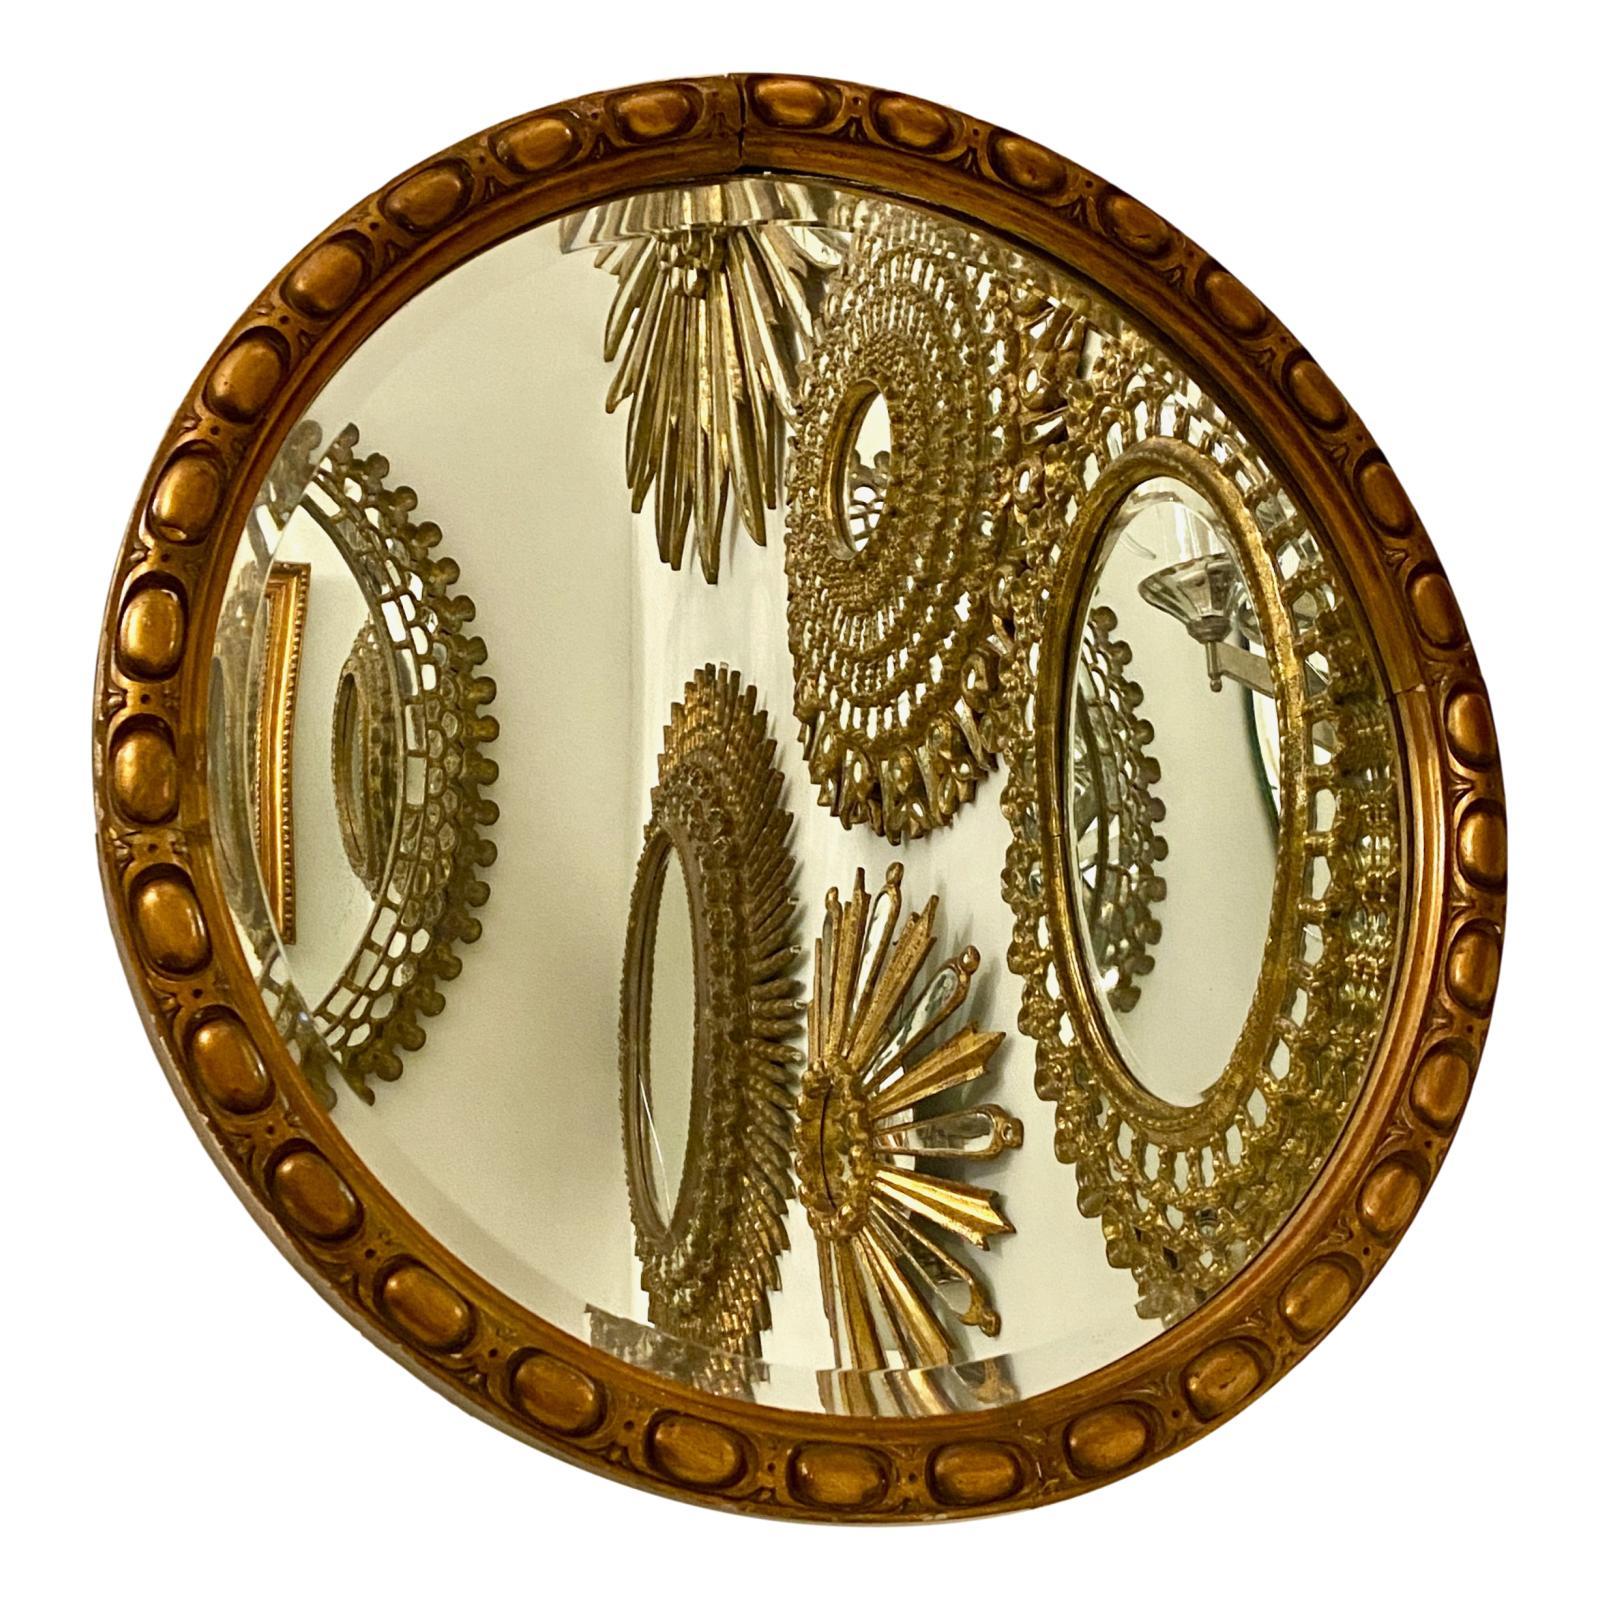 A circa 1900 Italian neoclassic style carved and gilt wood mirror with original finish and patina.

Measurements:
Diameter: 33.5